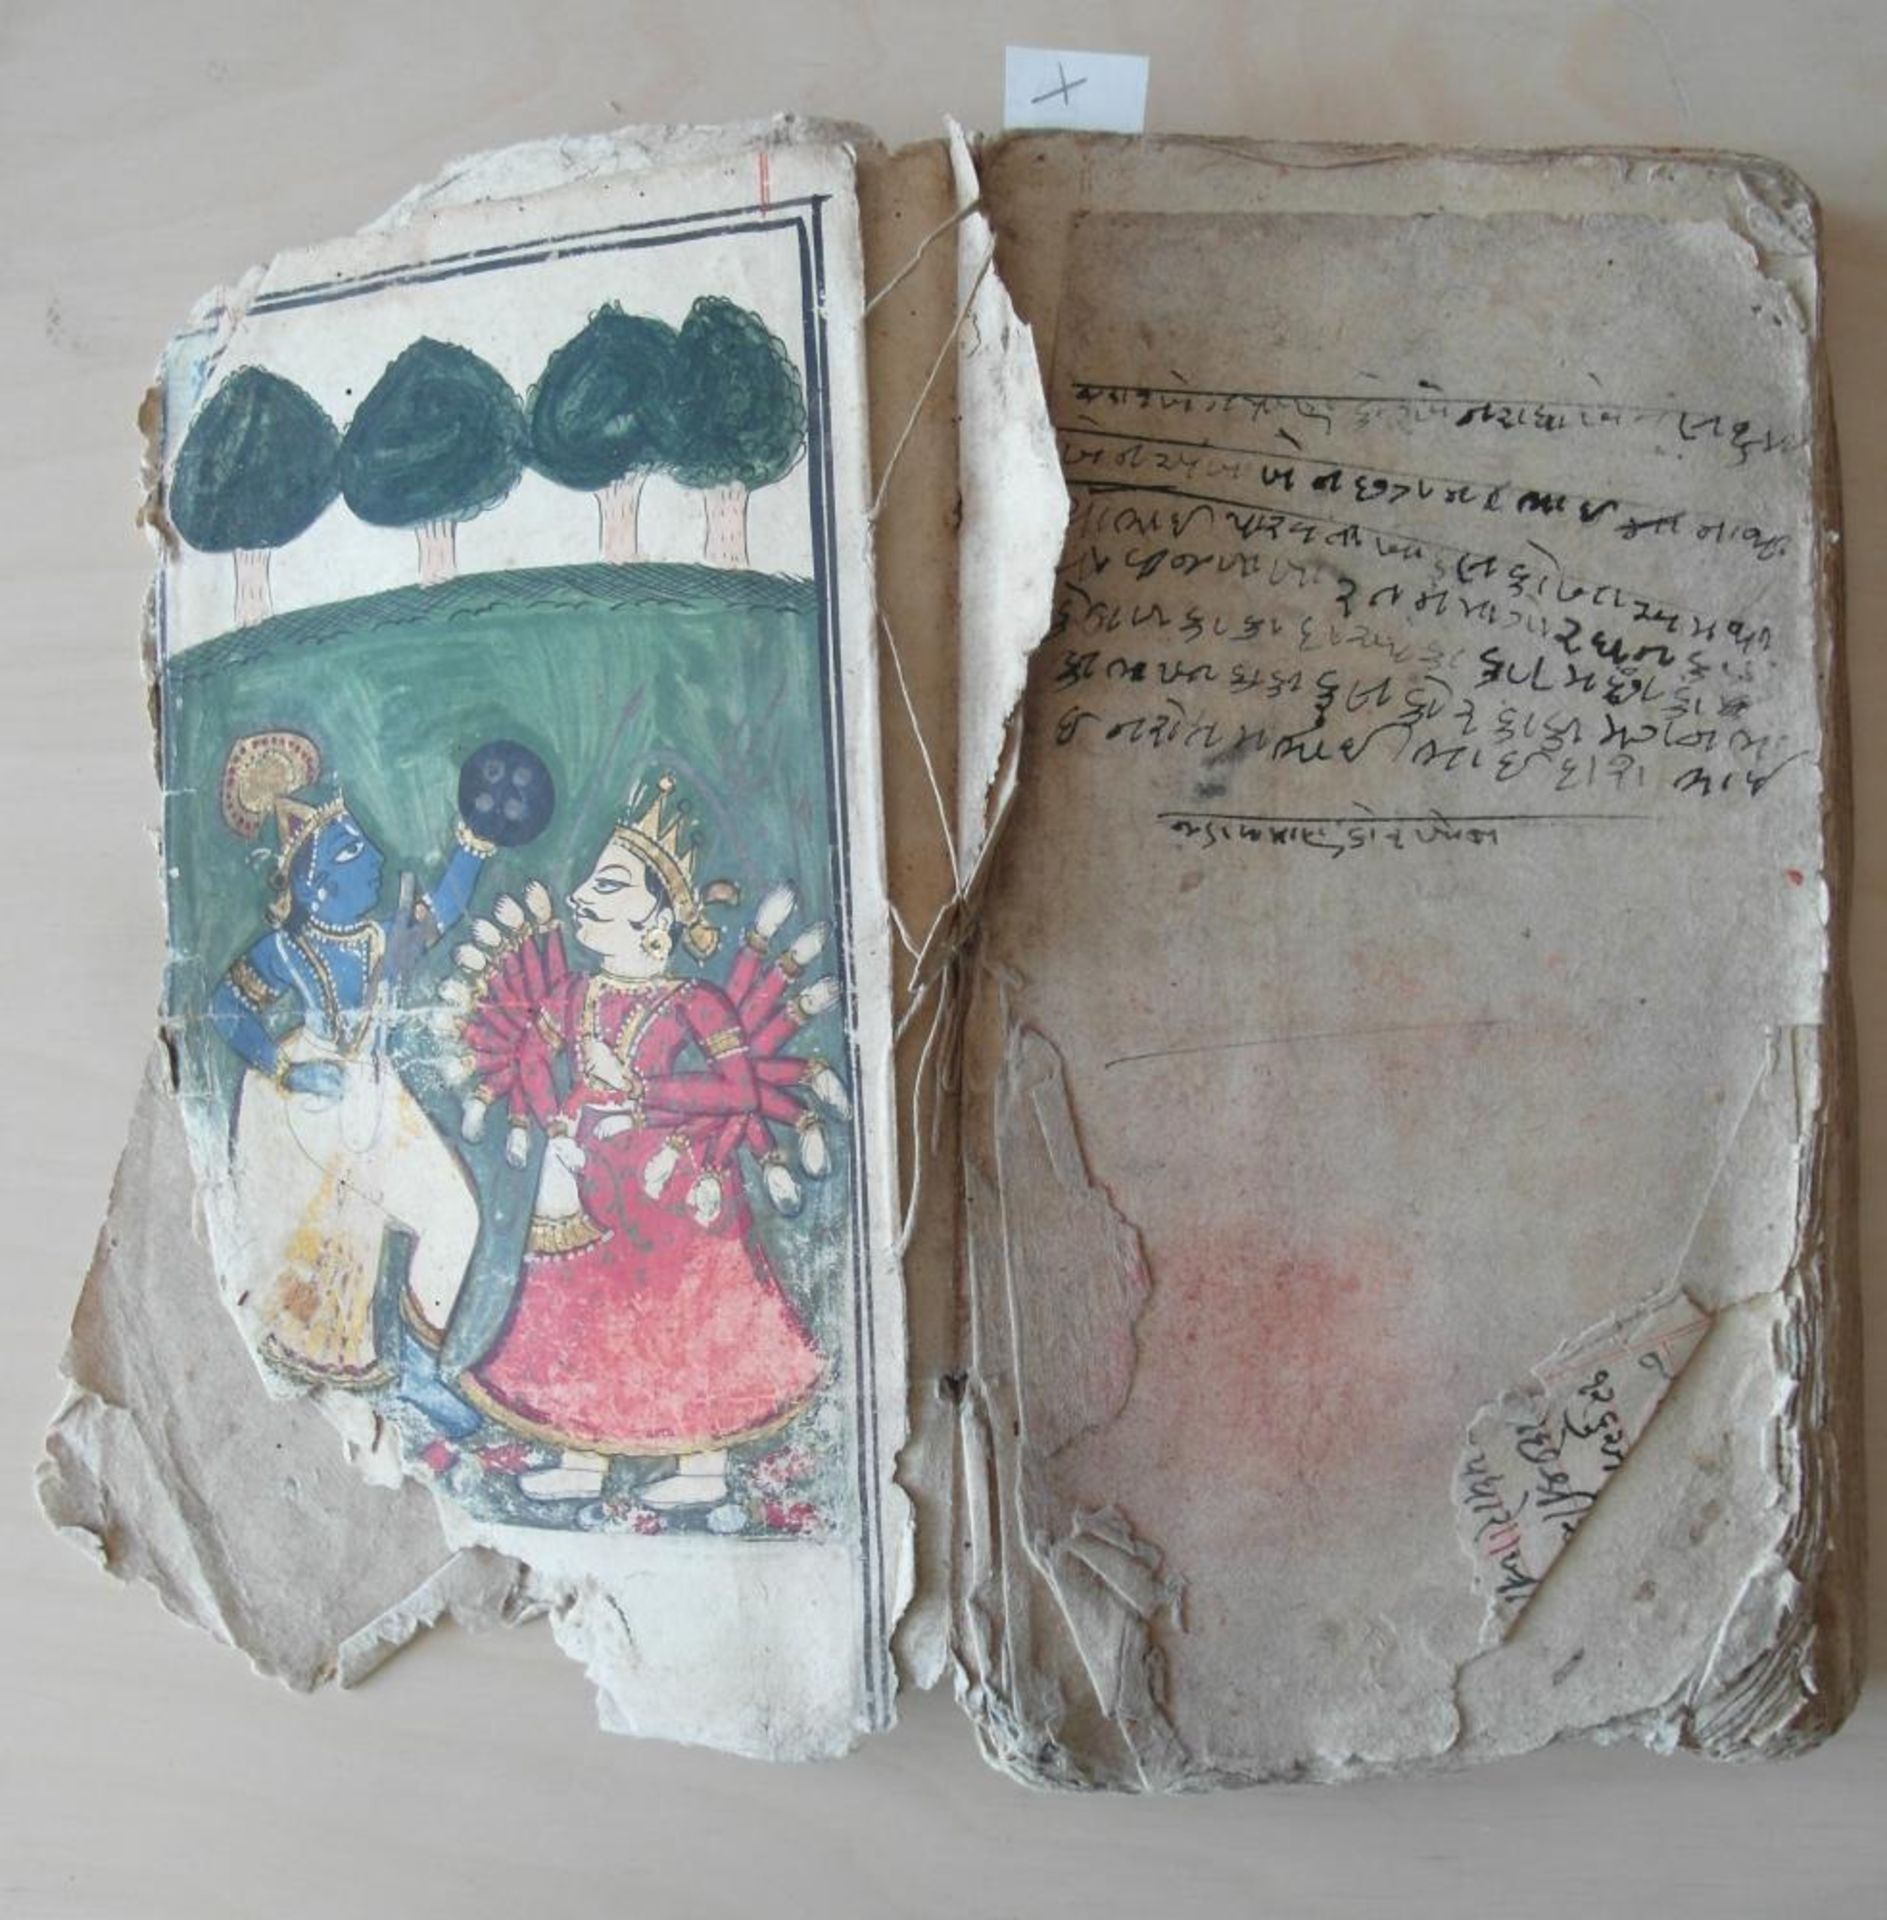 THREE ILLUSTRATED MANUSCRIPTS. India. 18th/19th c. Ink, pigments, partly with gold leaf on paper. a) - Bild 5 aus 23